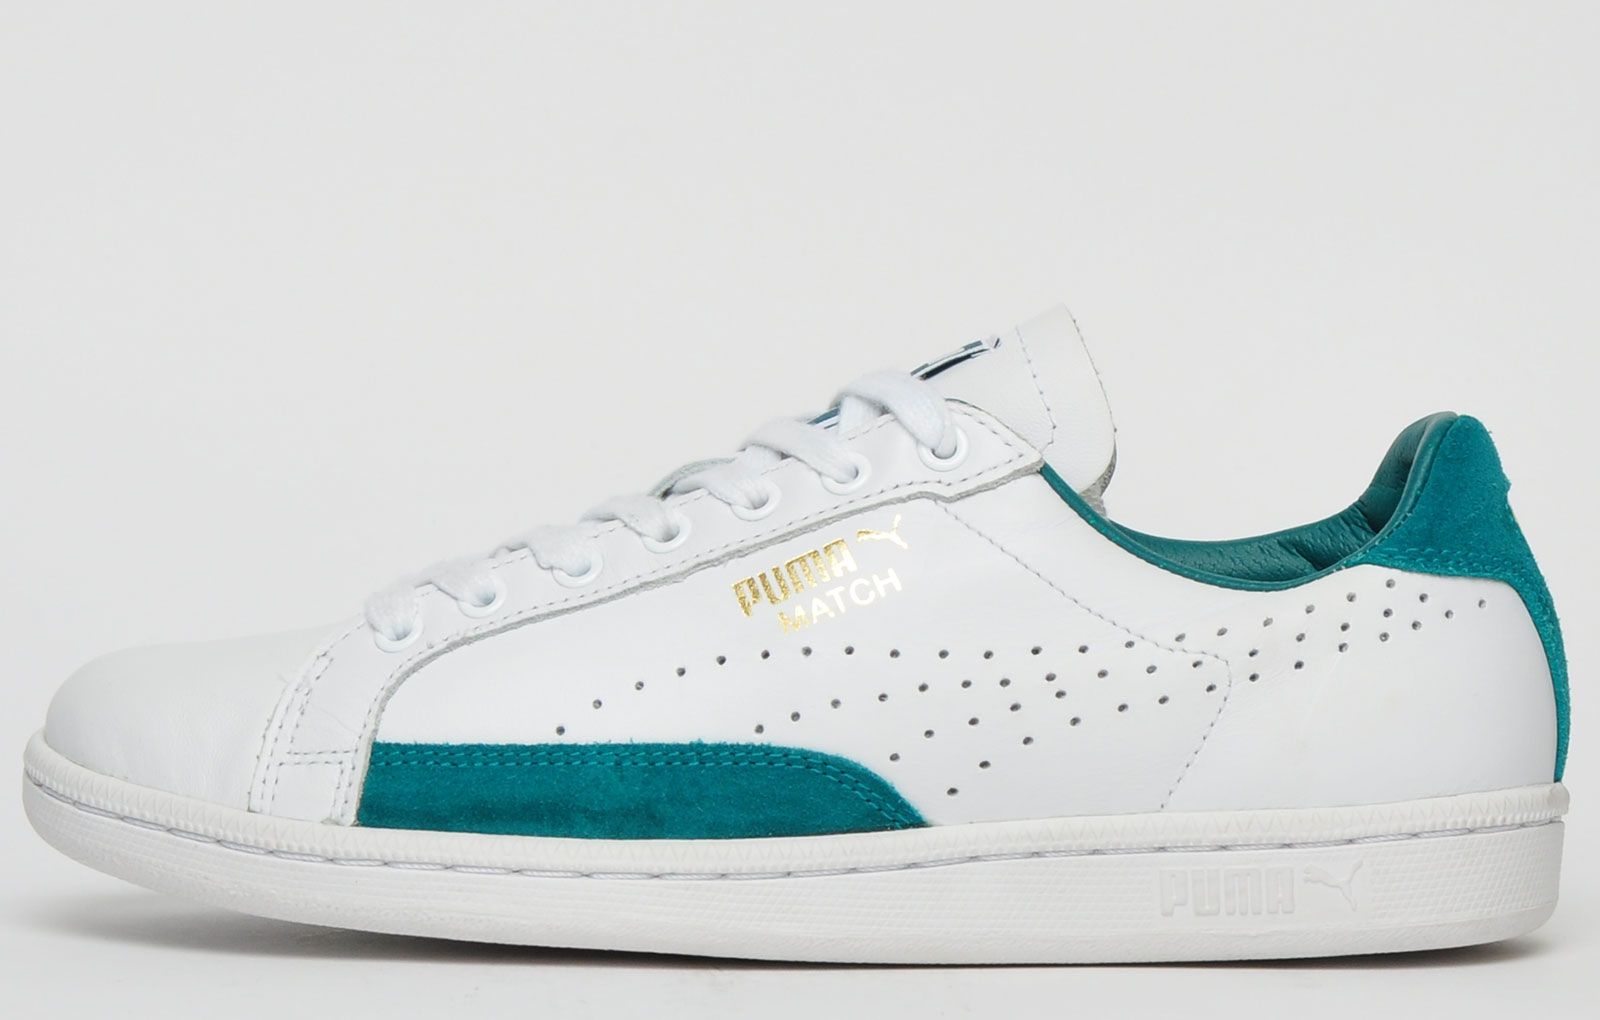 <p>The Puma Match 74 UPC from the iconic 1974 tennis collection features a soft leather upper with side perforations for breathability with the addition of suede panelling to the sides and heel with gold Puma branding to the side to complete the look.</p> <p>The Match 74 men’s shoe is finished off with a durable rubber sole with a textured finish which will provide stability and grip on all surfaces and with a slimmed down look to give that sporty designer feel</p><br> <p class=